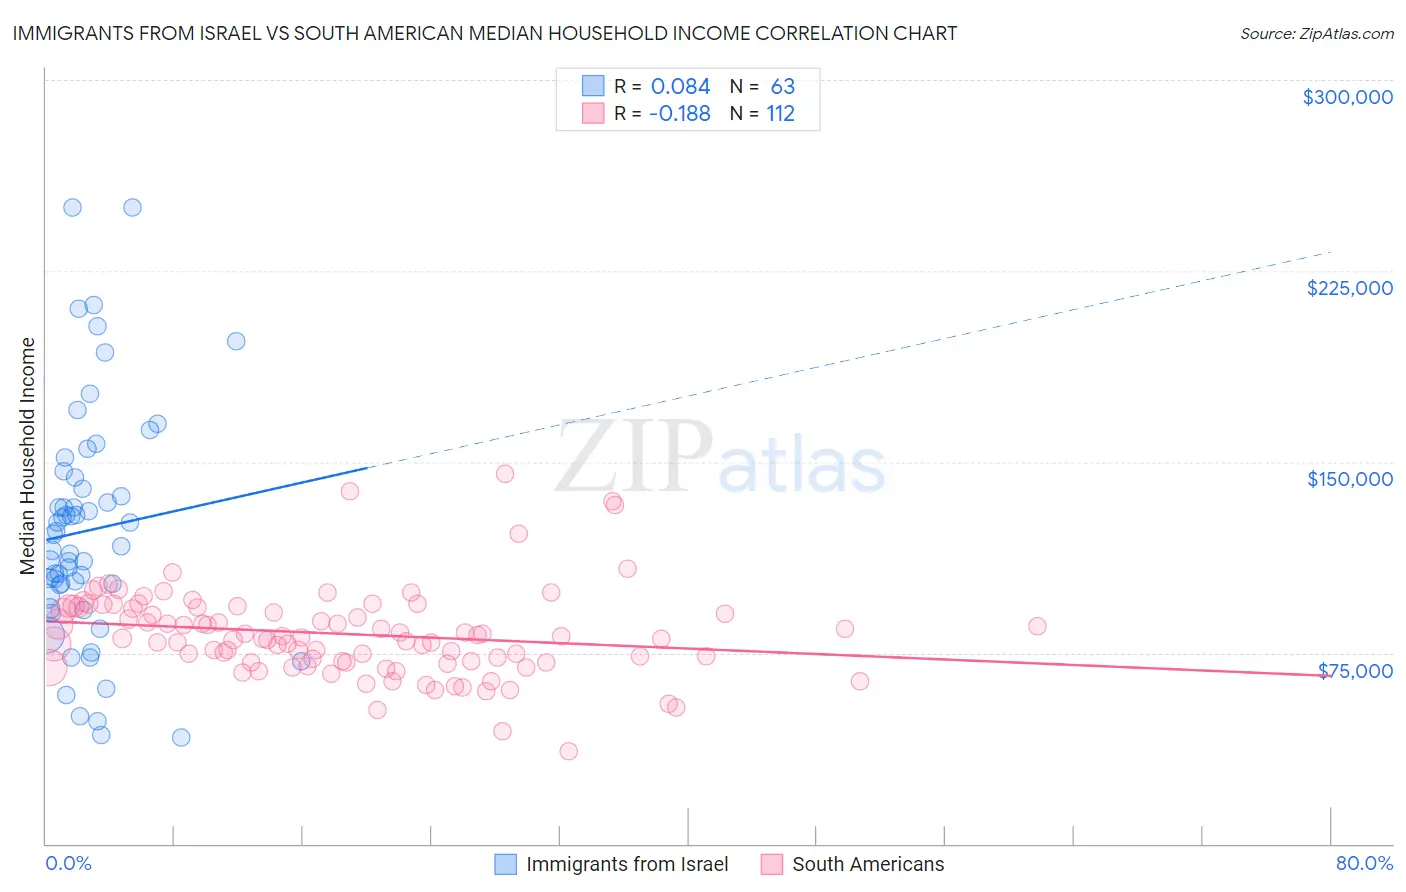 Immigrants from Israel vs South American Median Household Income